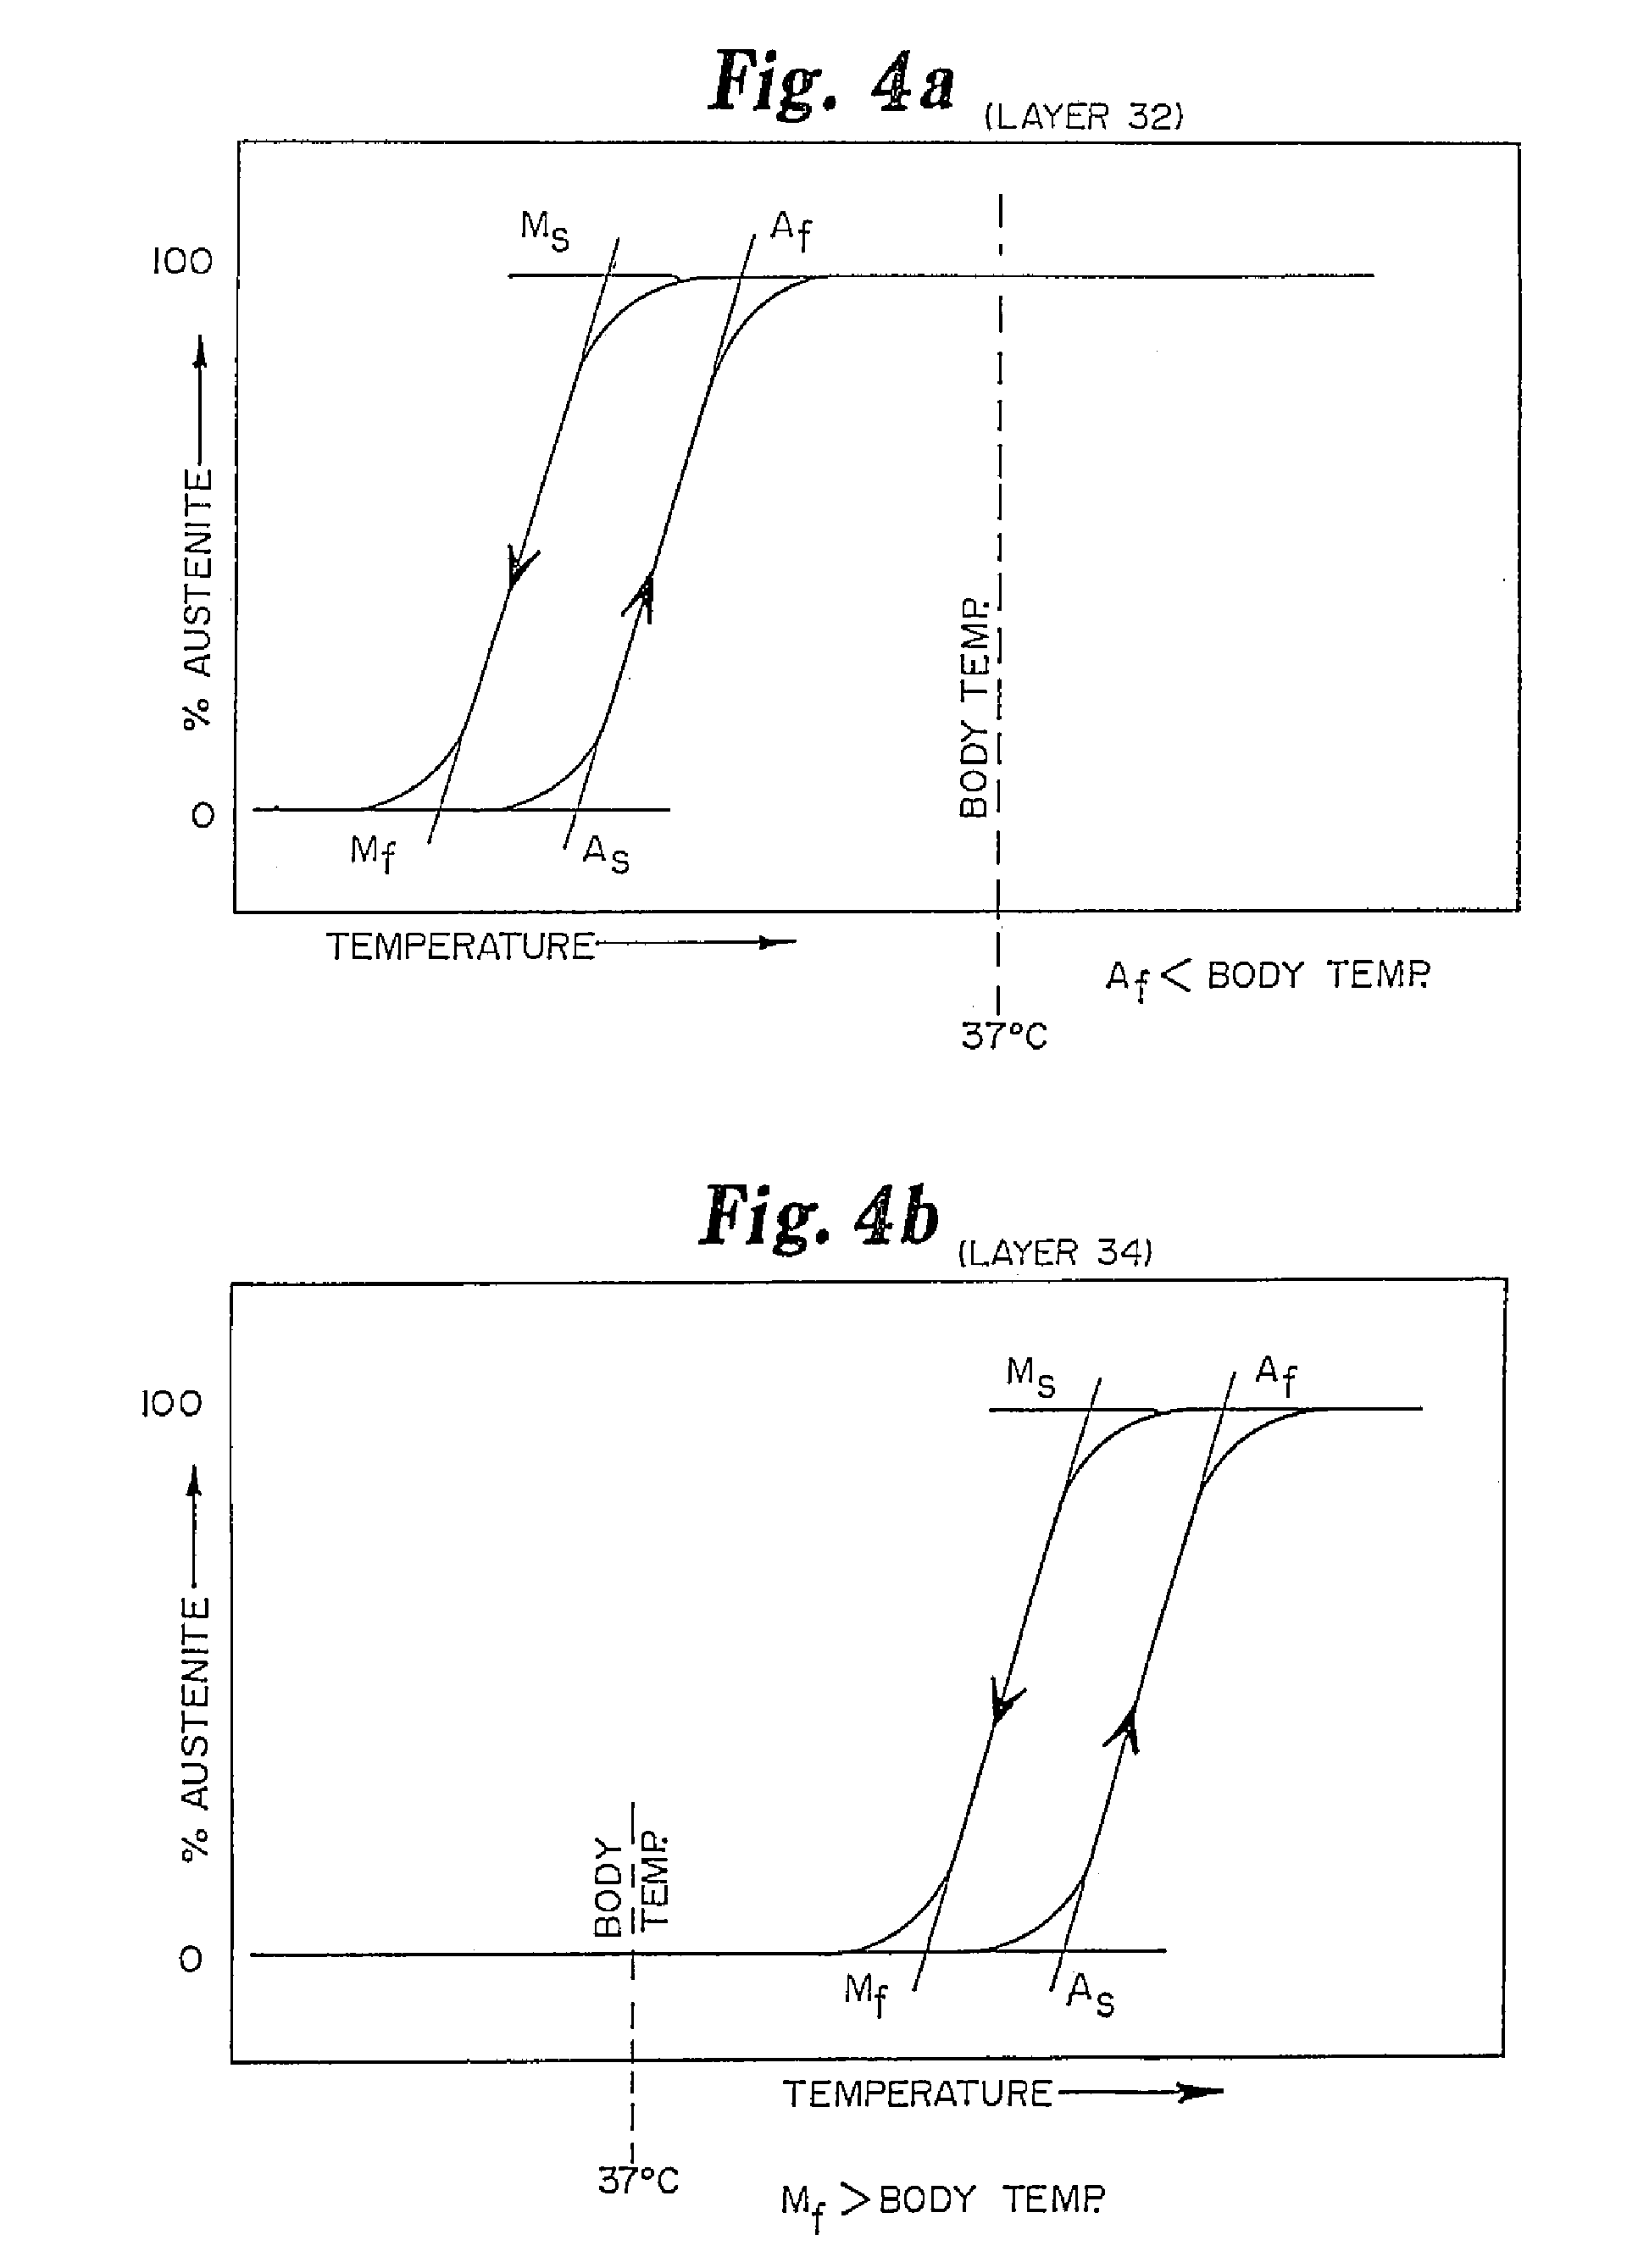 Improved tissue supporting devices